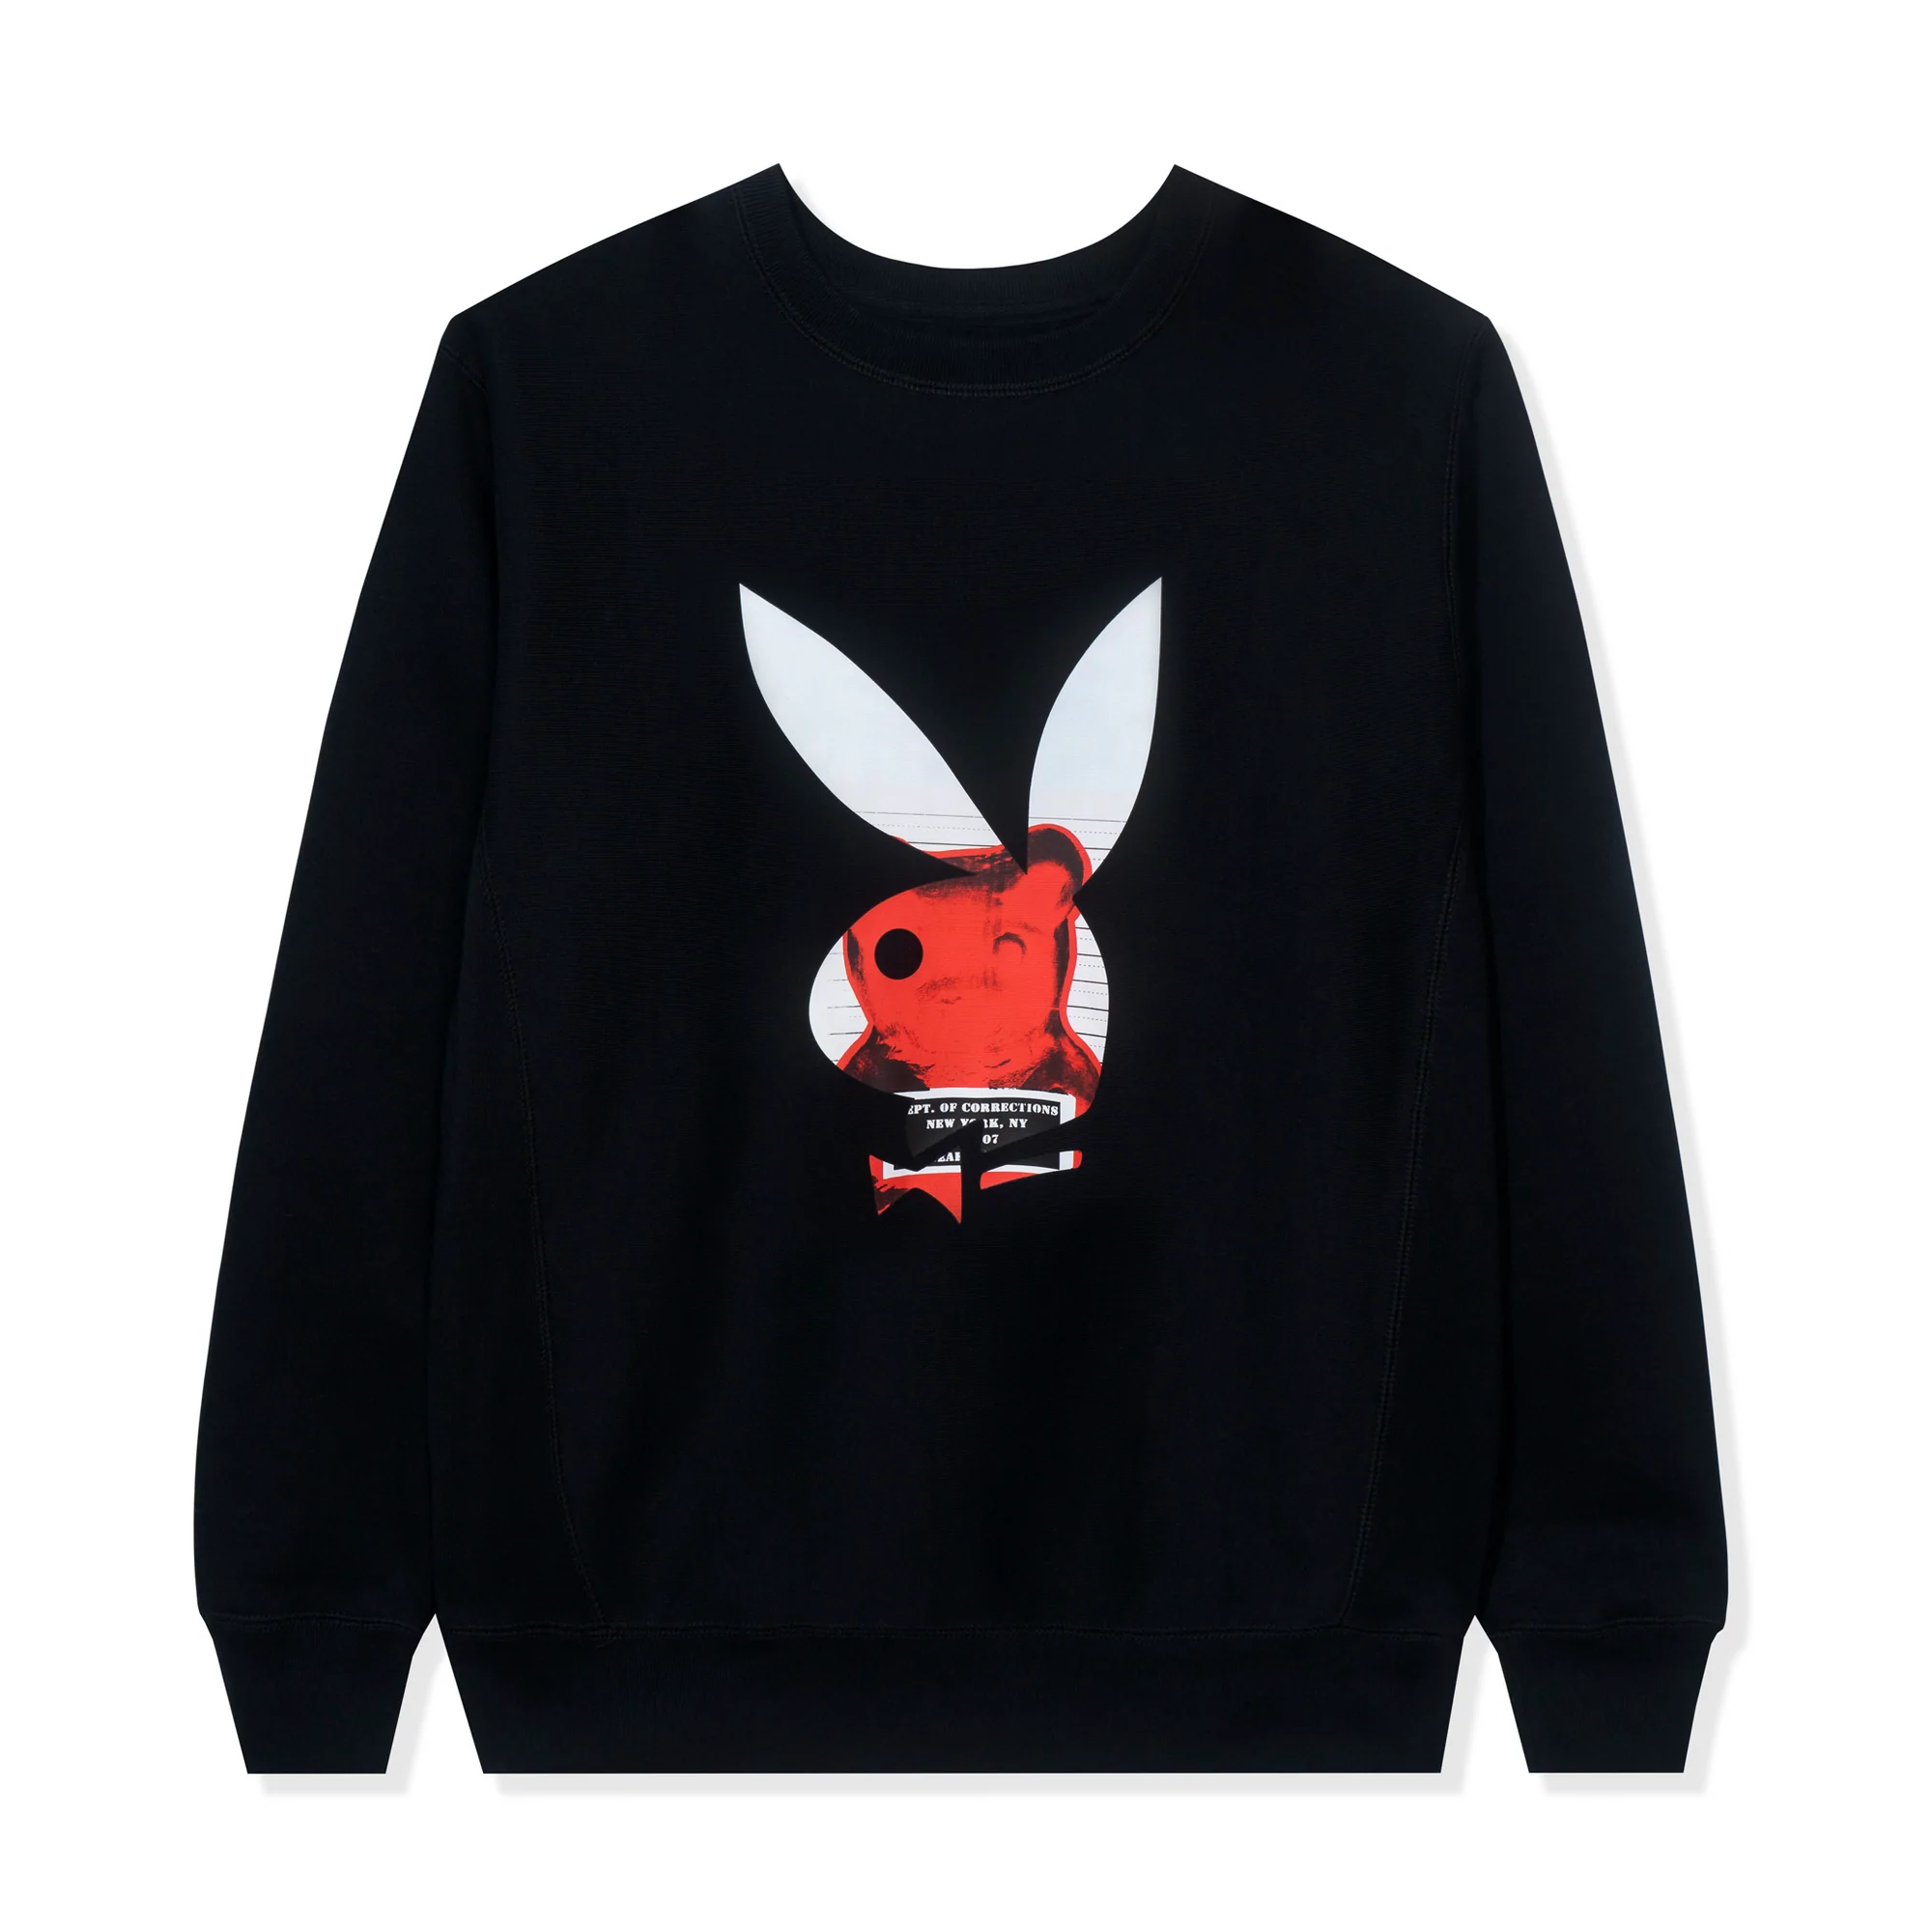 The Playboy Hoodie is more than just a piece of clothing;